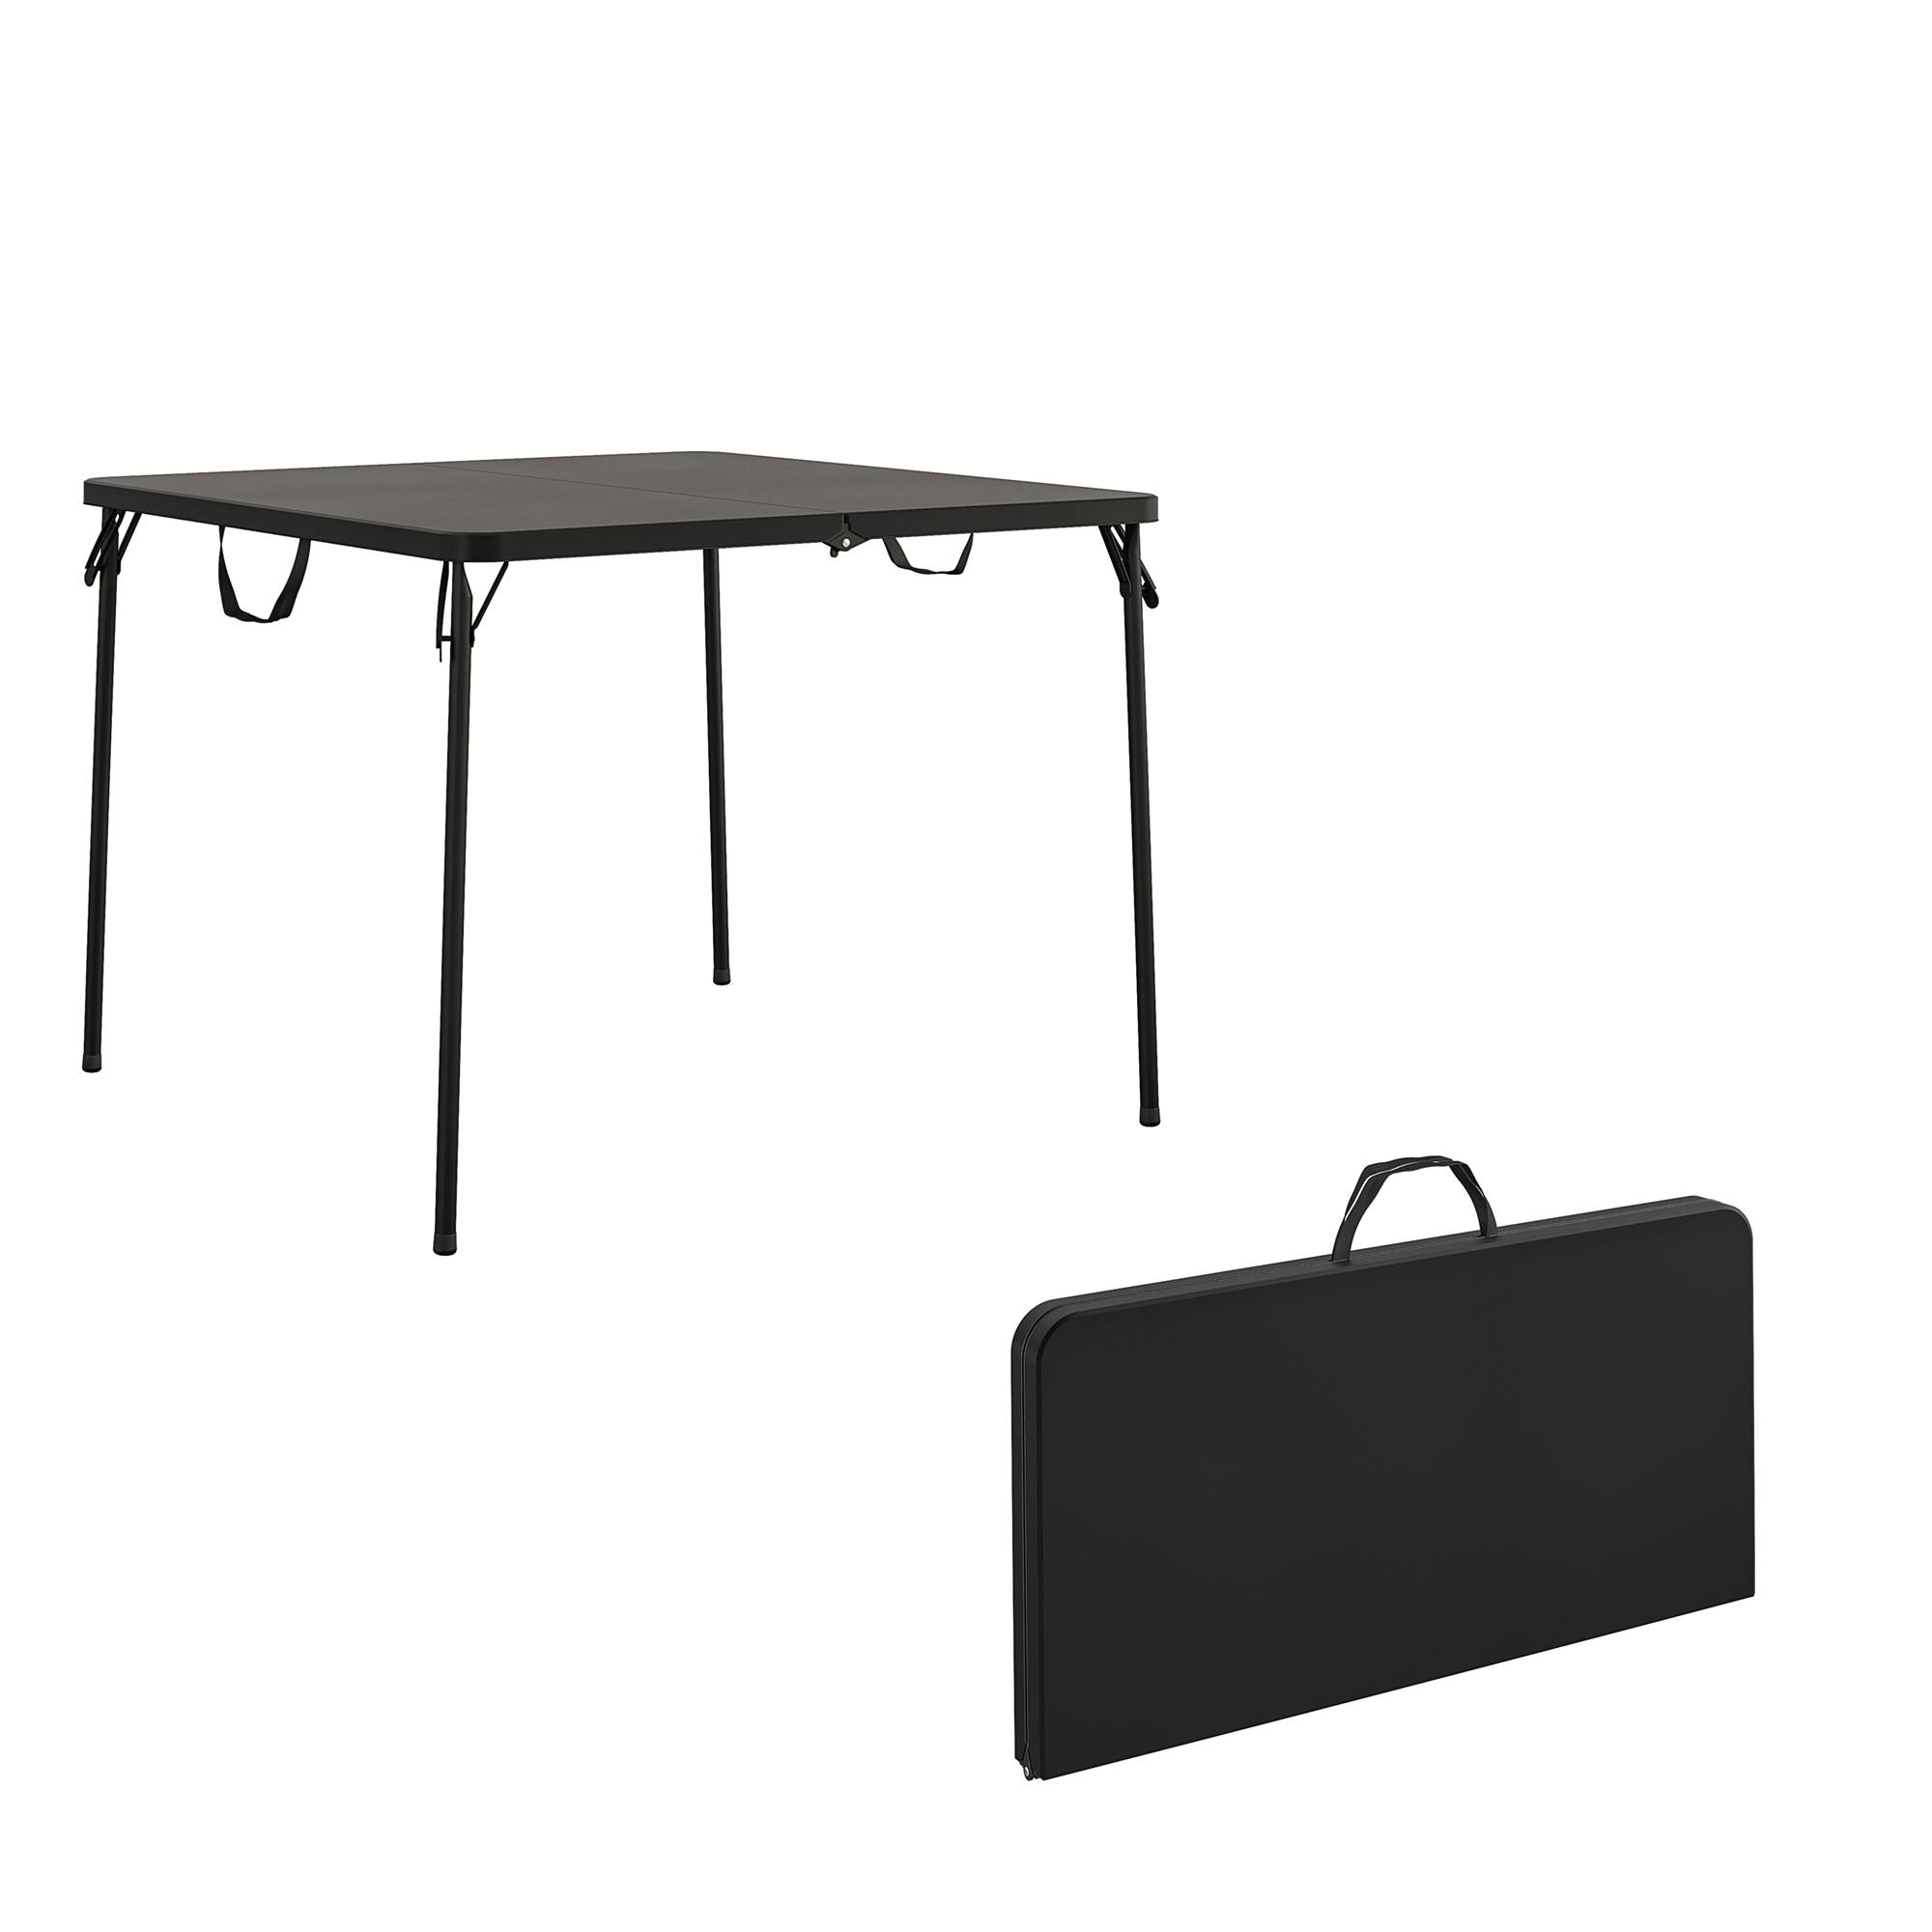 XL 38.5" Fold-in-Half Card Table w/ Handle - Black - 1-Pack